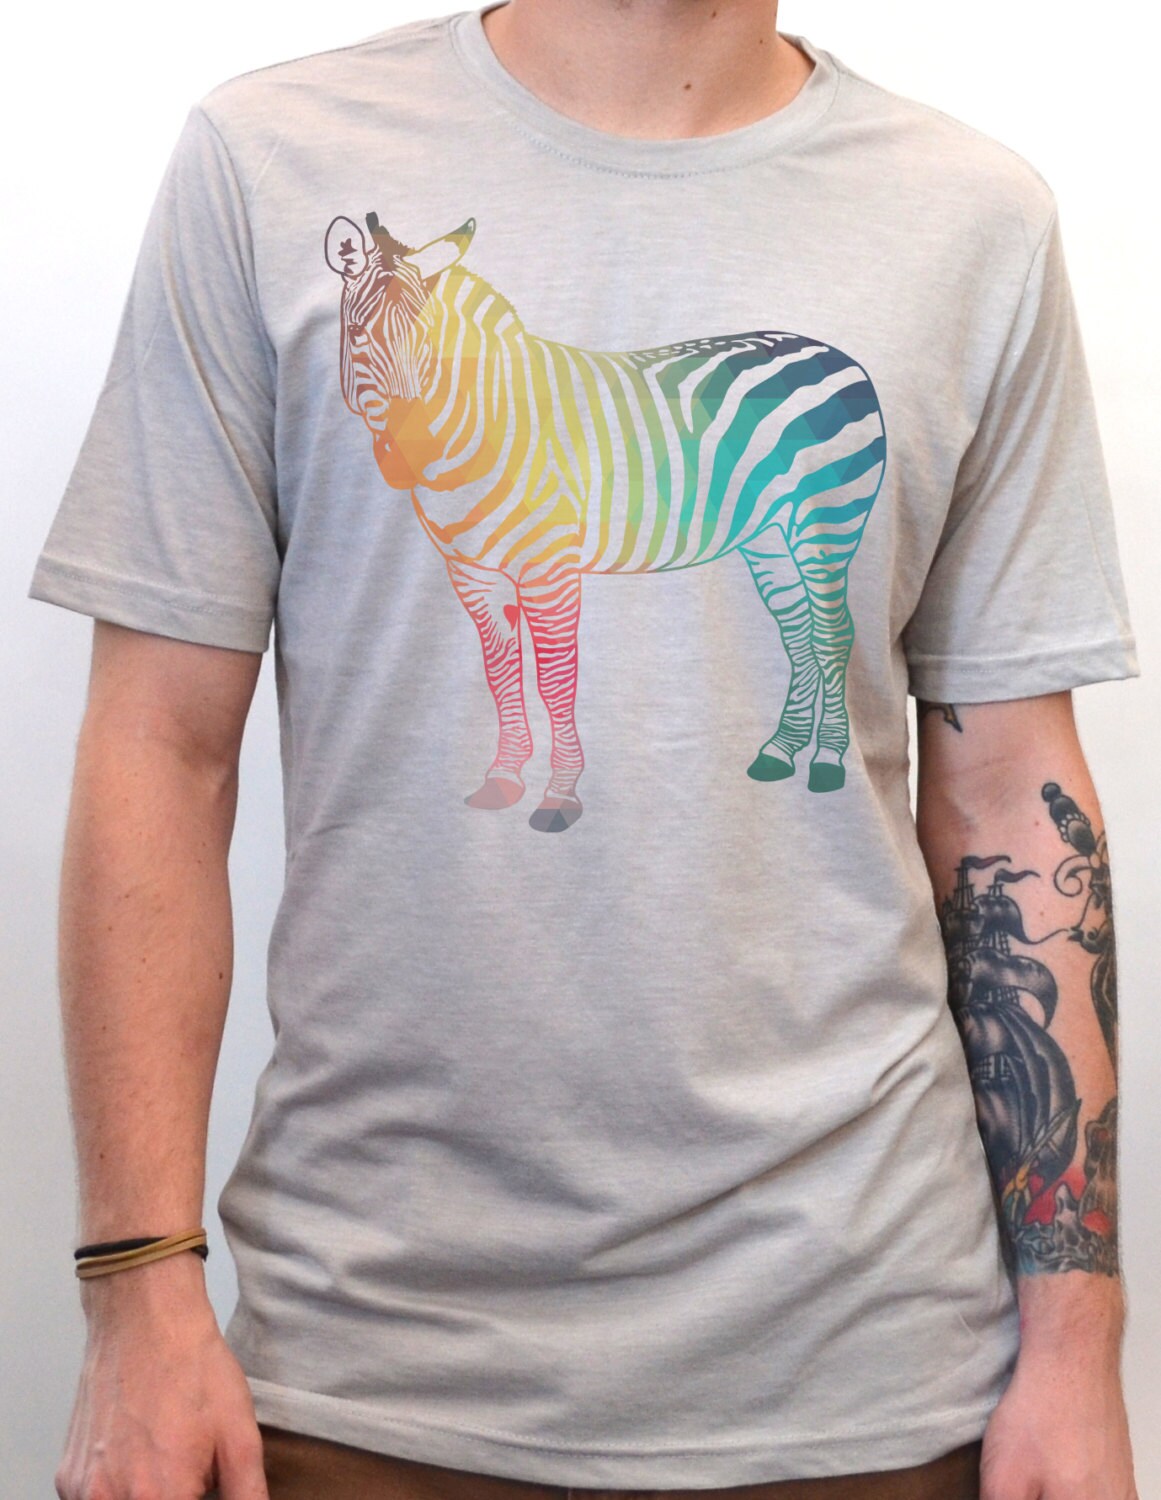 Abstract Geometric Zebra T-shirt Men's Graphic T Shirts by - Etsy